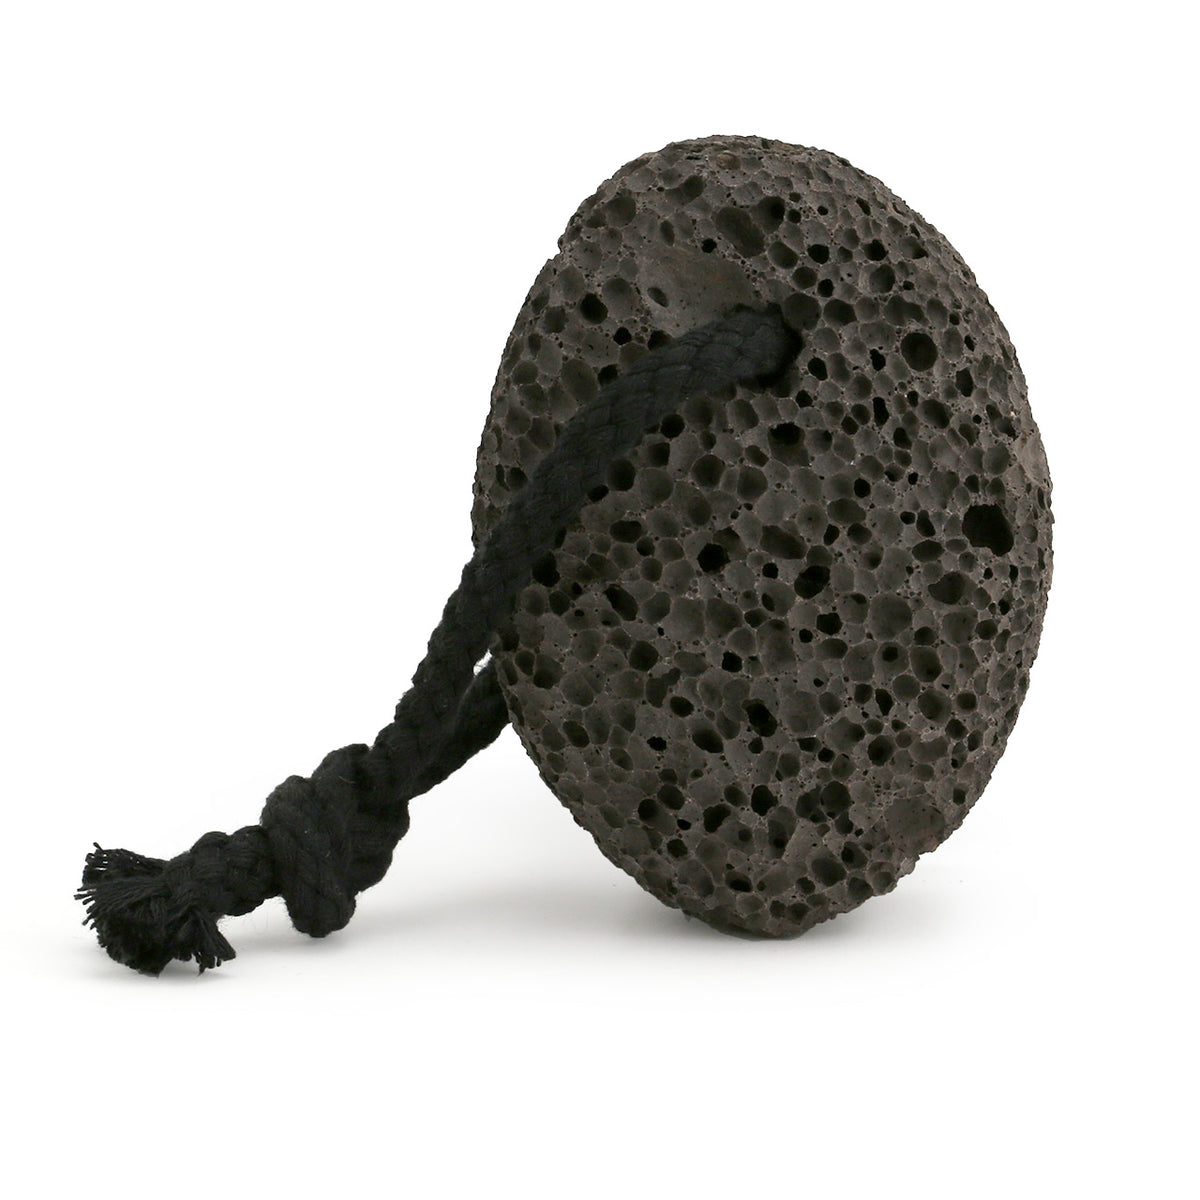 black volcanic pumice stone on black rope from Redecker, Germany